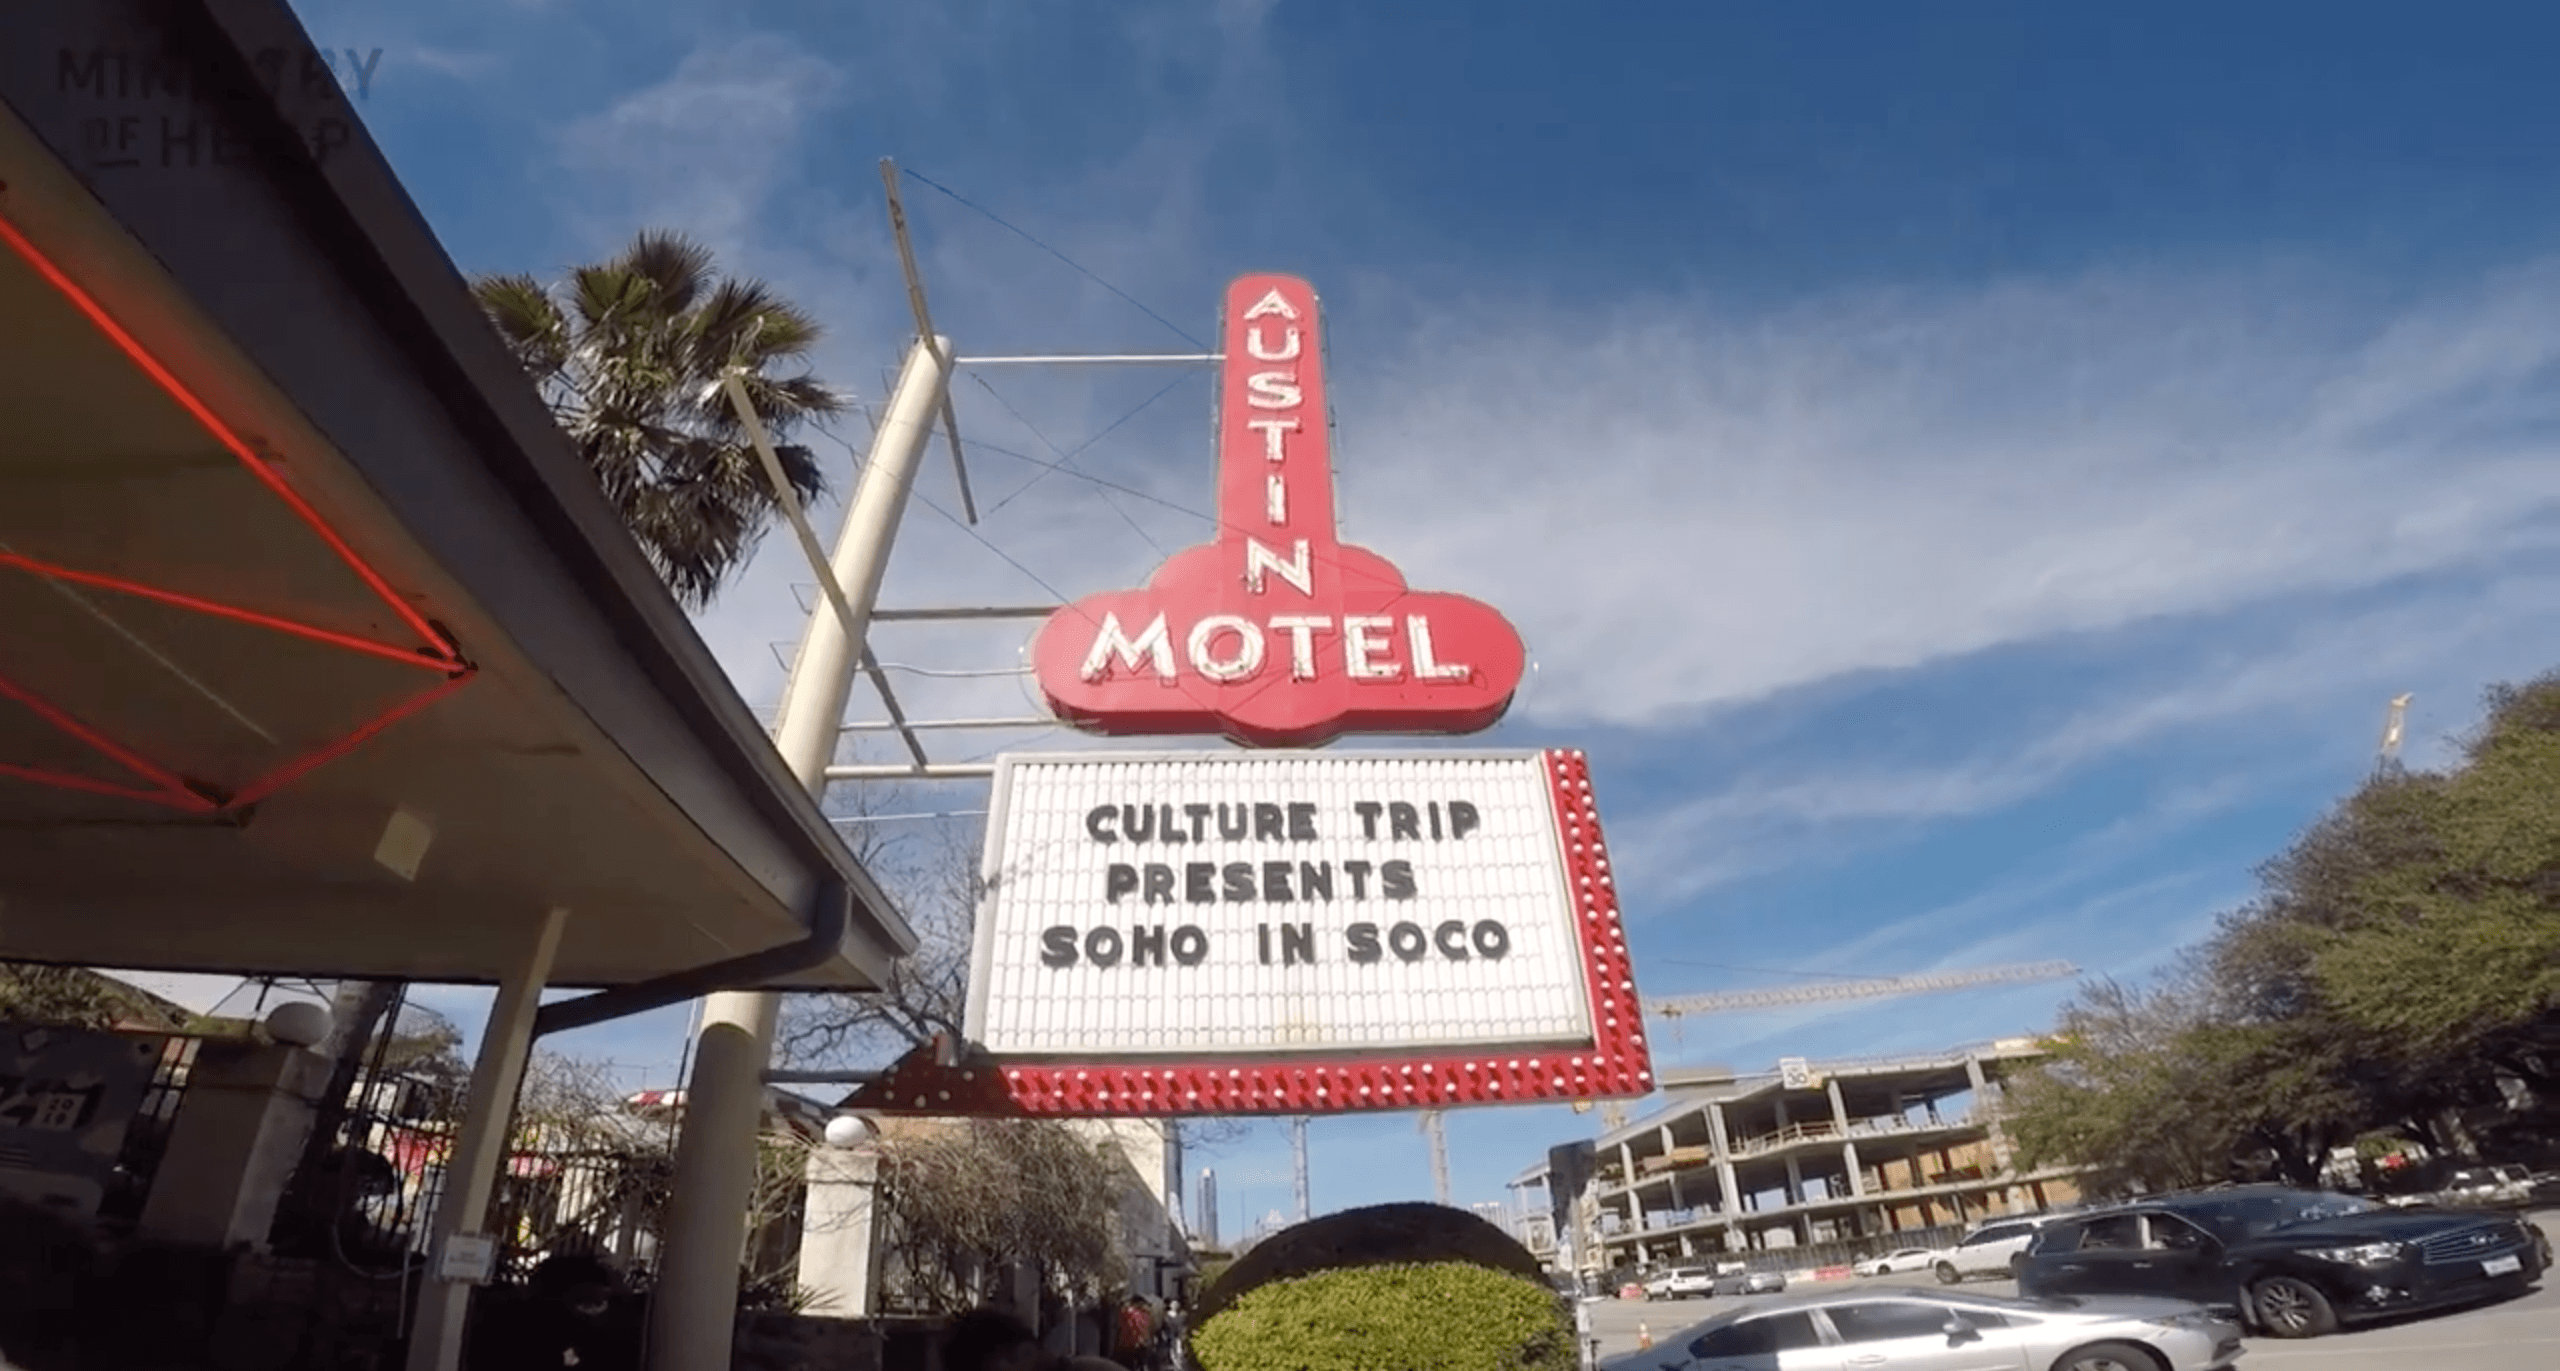 We got CBD facials from two women-owned Austin, Texas businesses at SXSW during the Culture Trip activation. Photo: The sign for Austin Motel, in Austin, Texas with a marquee advertising Culture Trip Presents SoHo in SoCo.